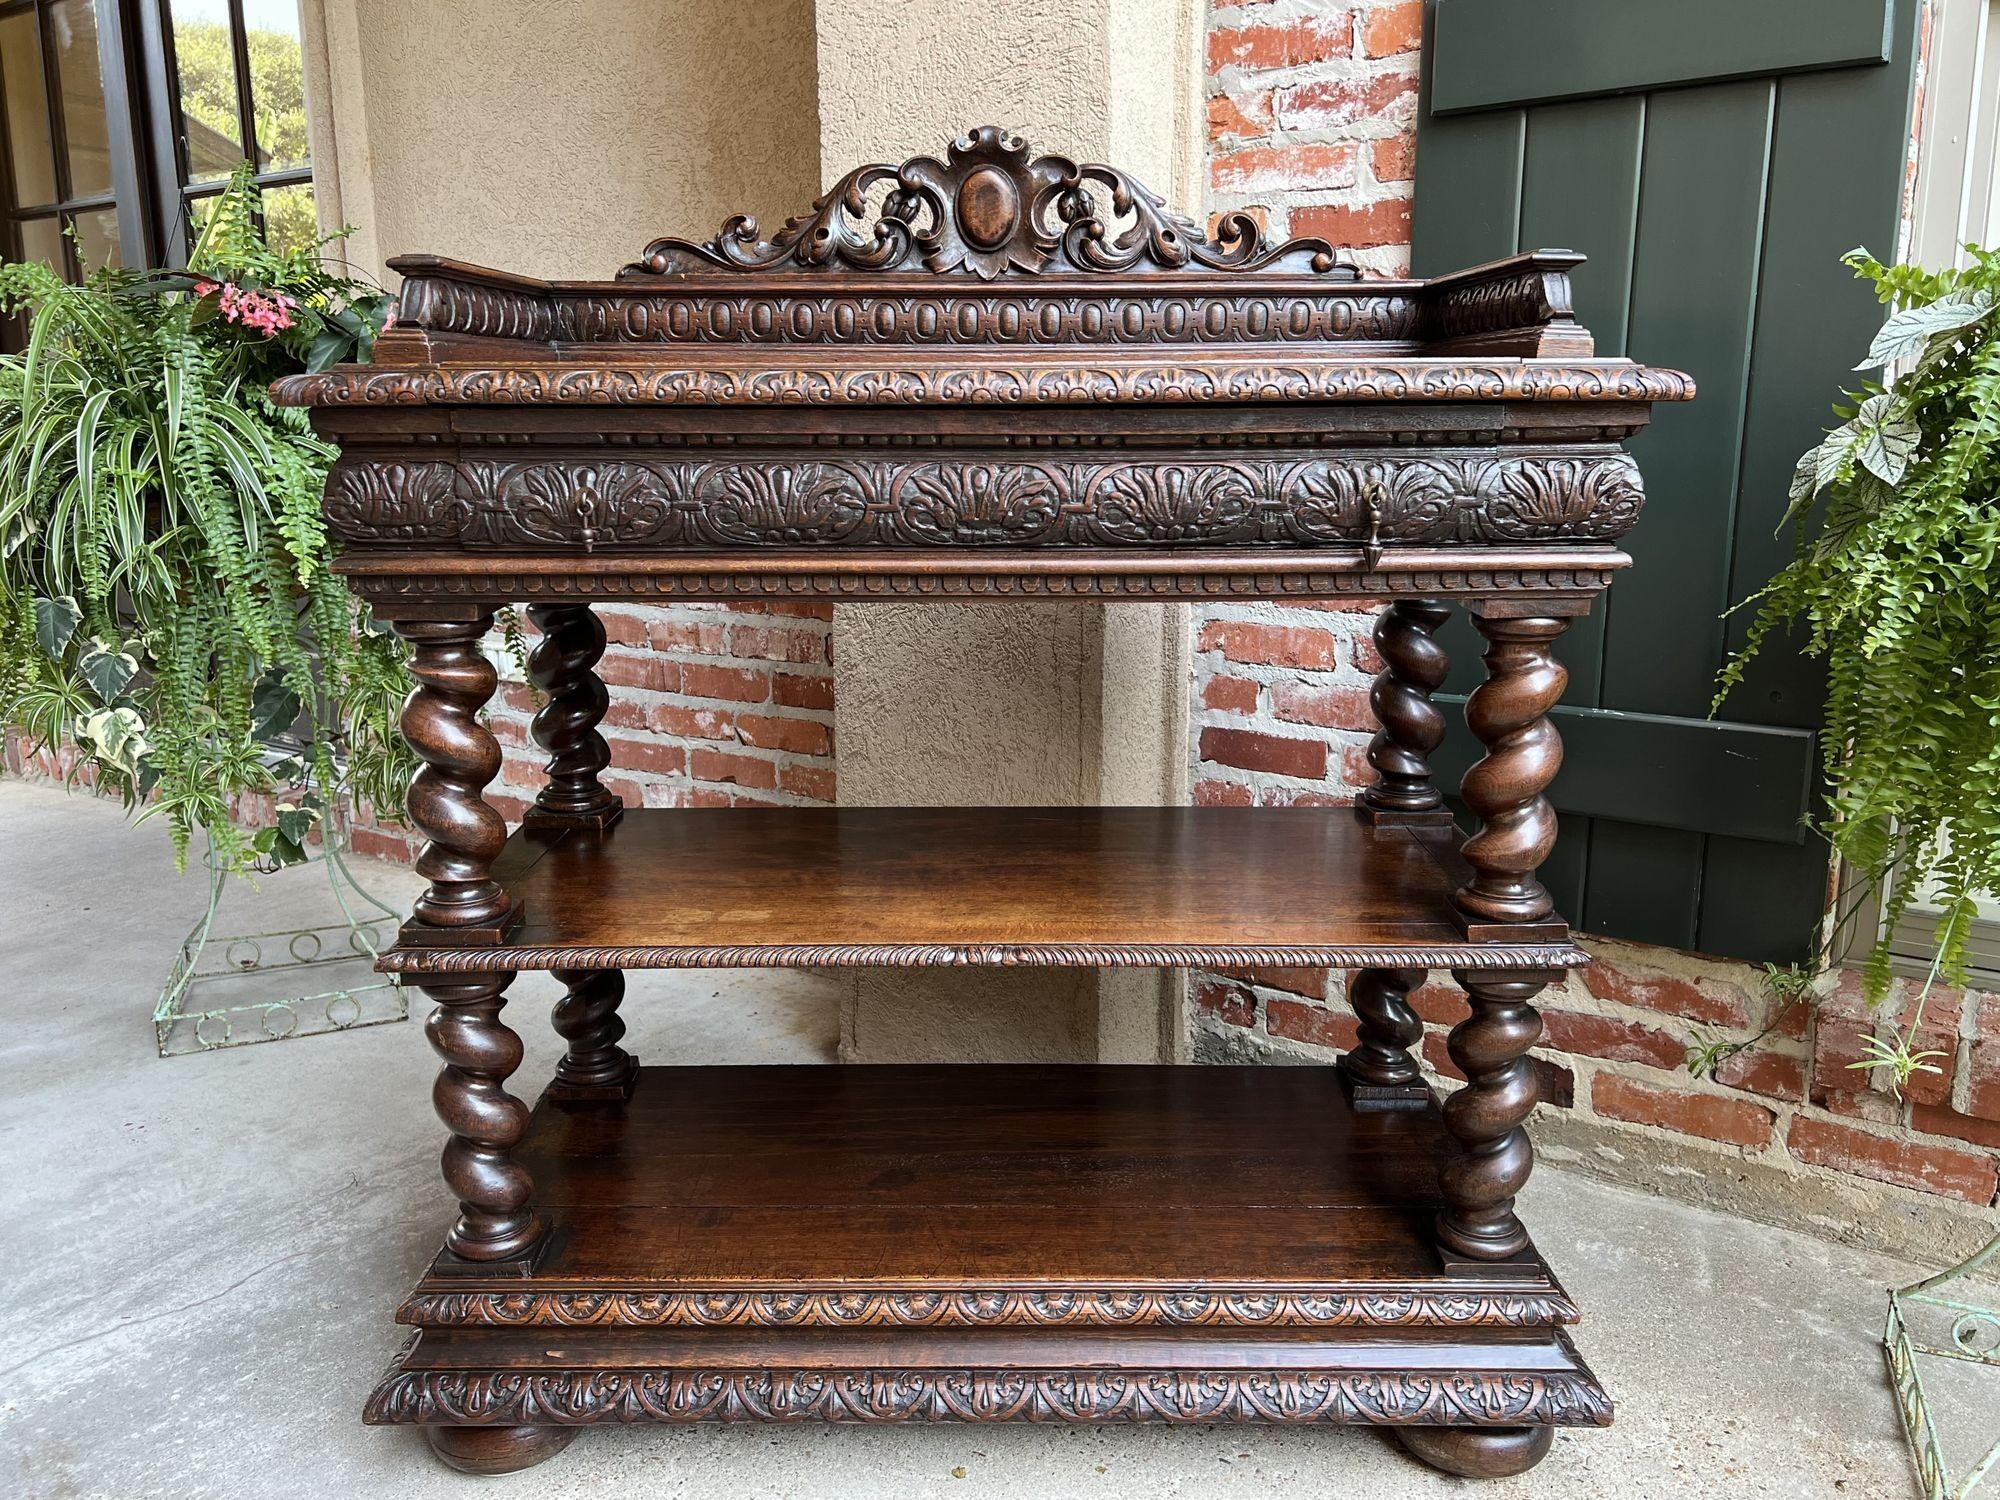 19th century French carved oak server sideboard barley twist wine buffet shelf.
 
Direct from France, a very special, highly carved, 19th century French server/sideboard! Gorgeous open carved back with center medallion over egg and dark carved